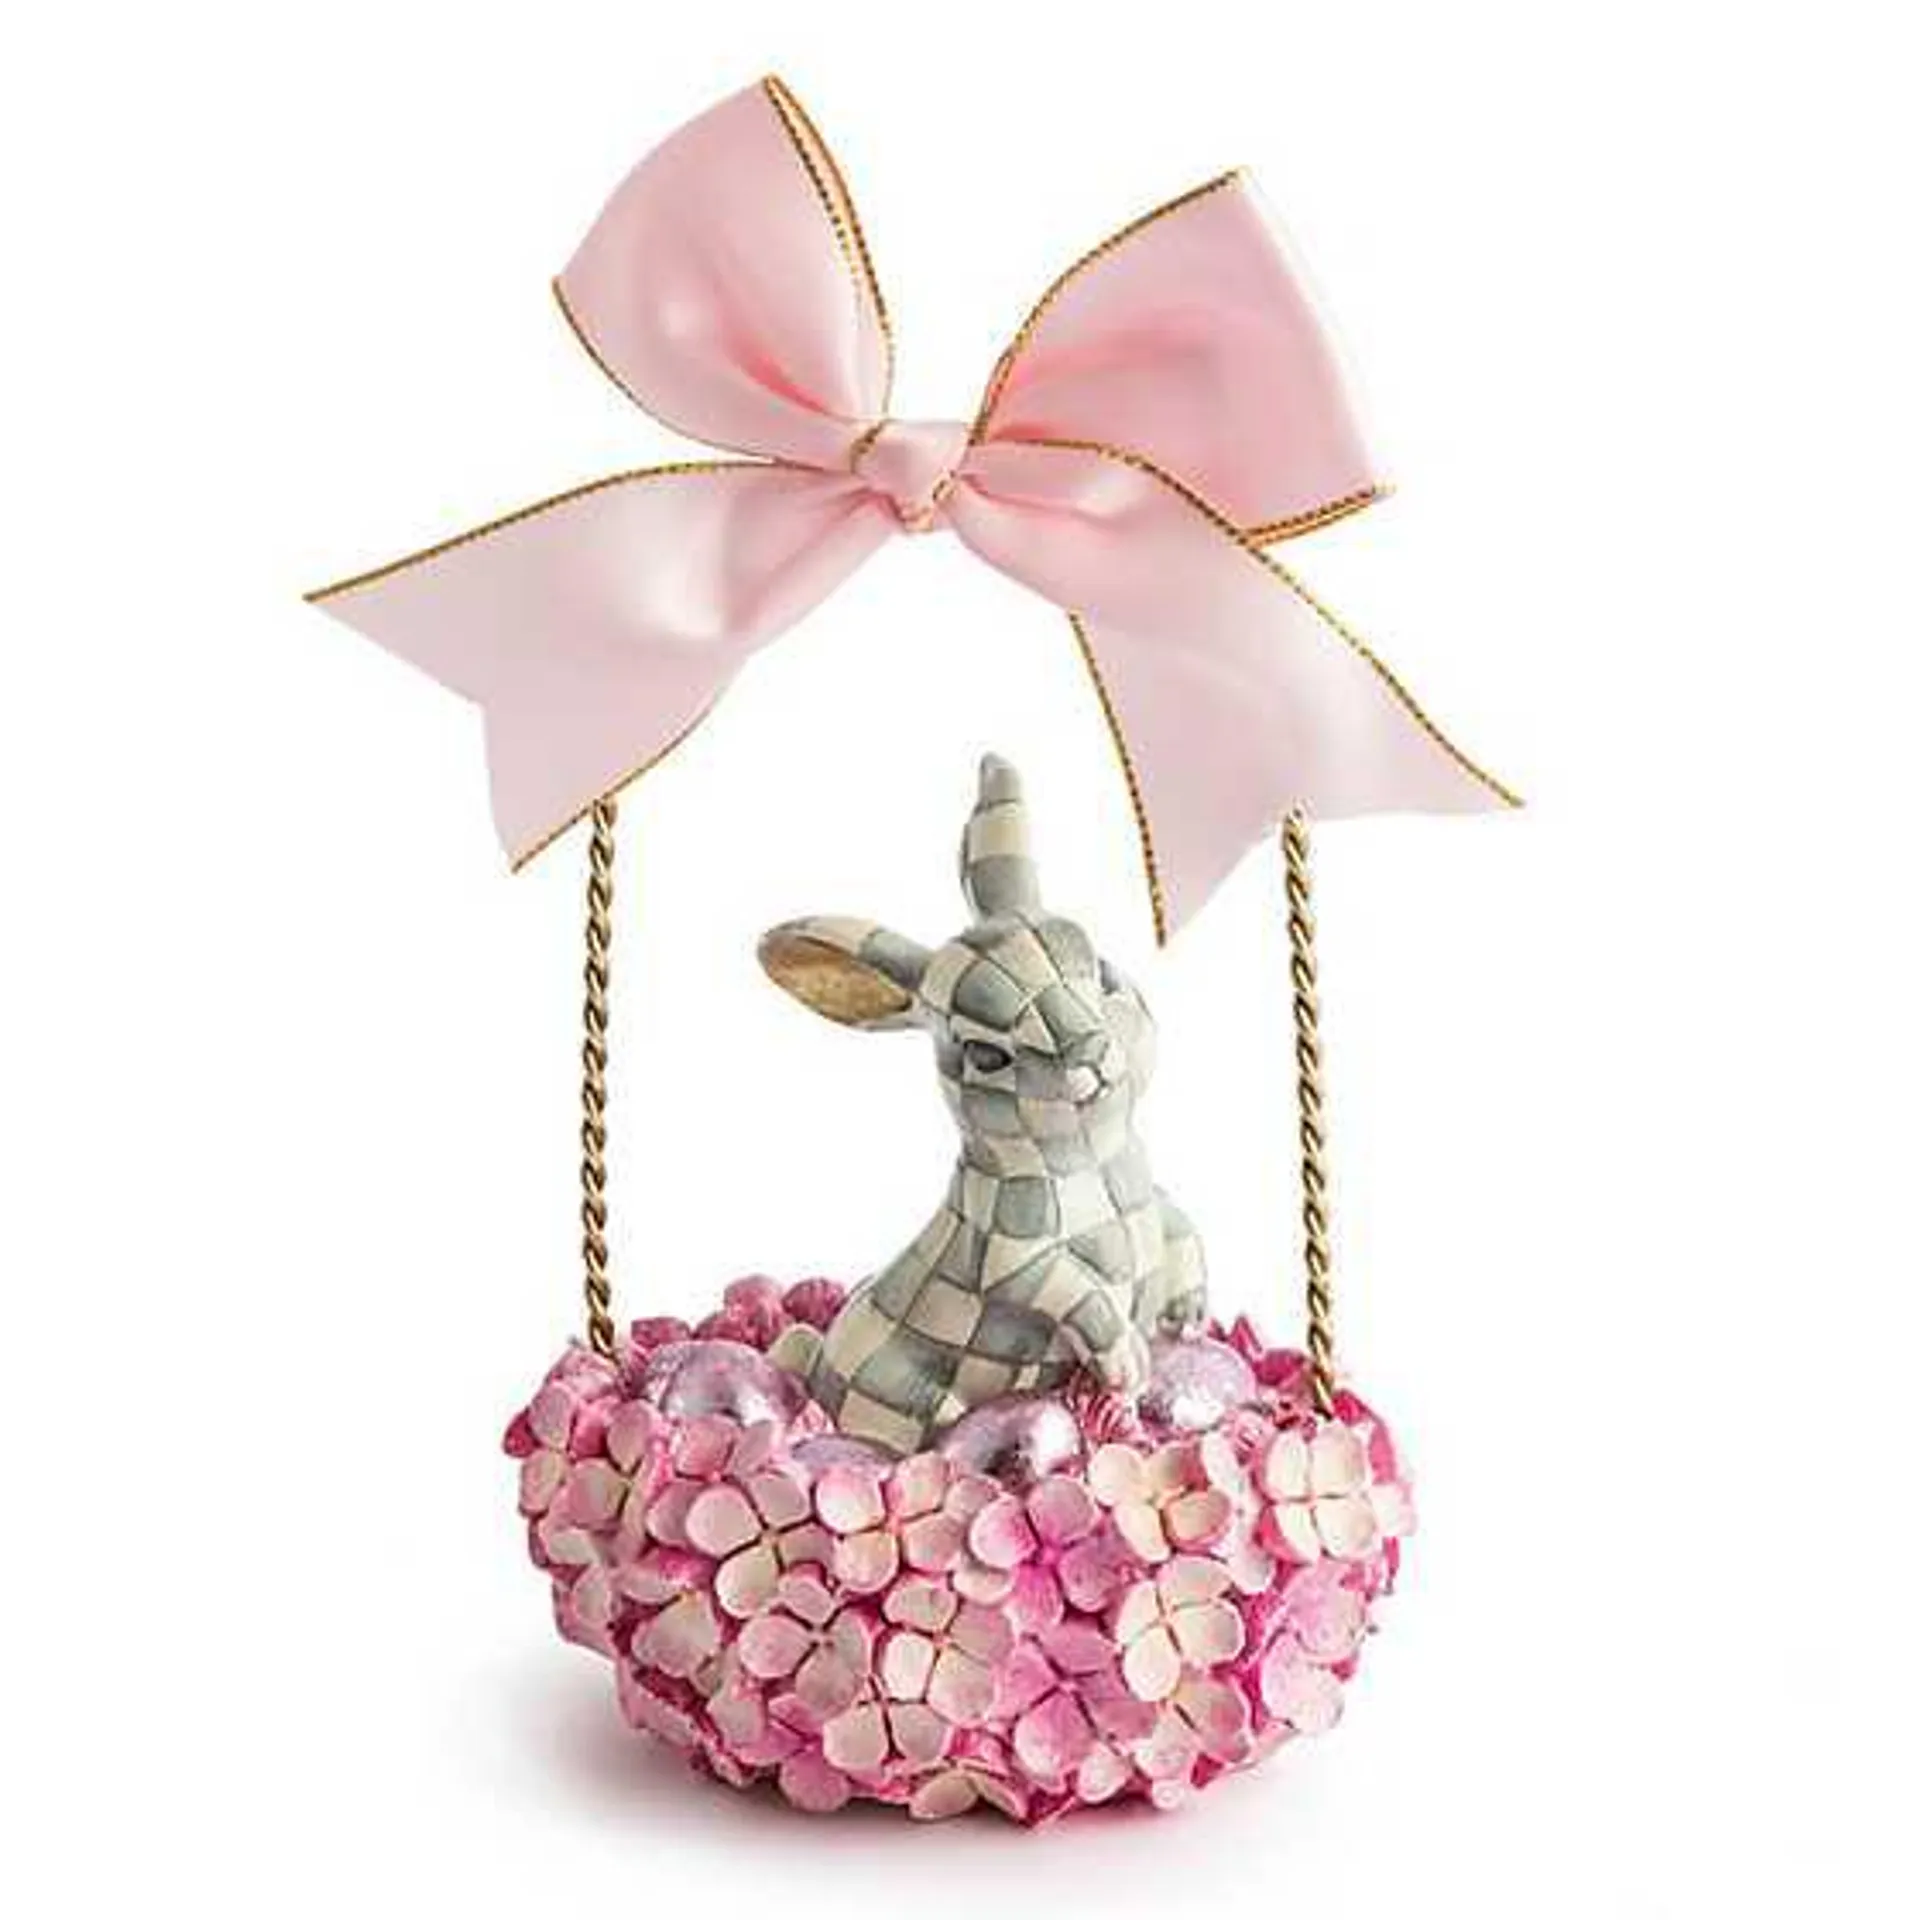 Touch of Pink Bunny Basket